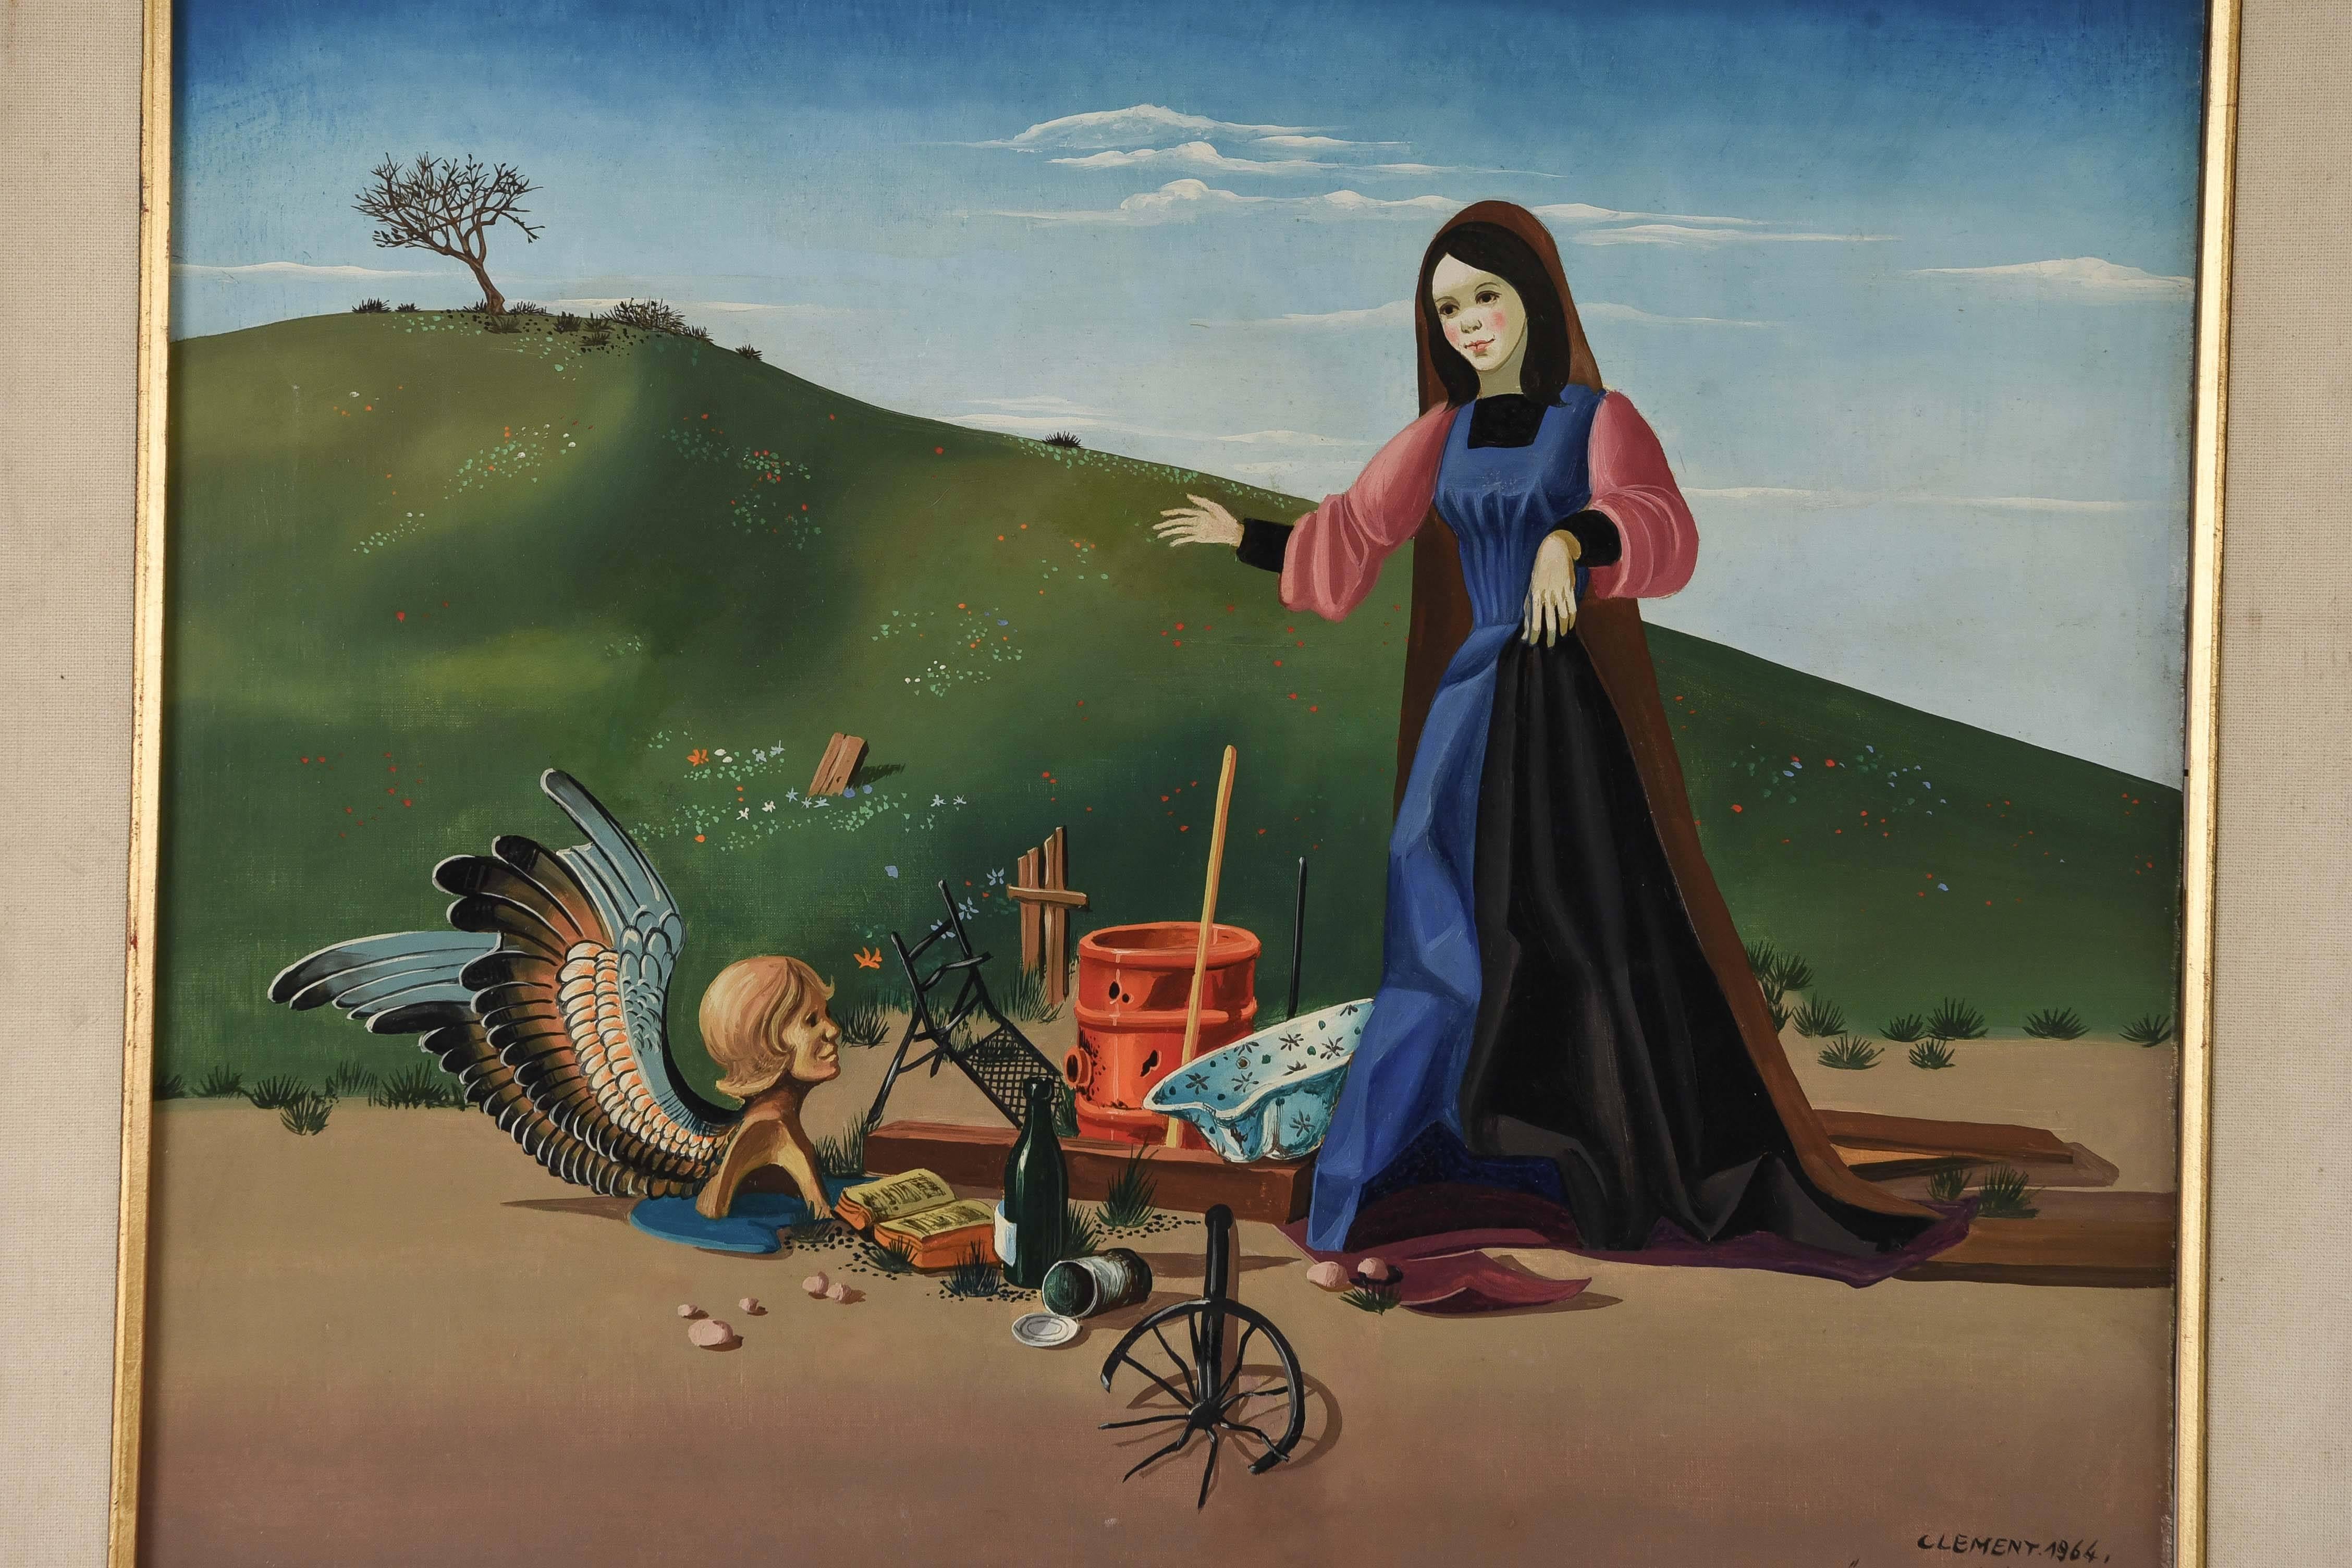 A surrealist scene by listed French artist Jean Pierre Clement depicting a cloaked female figure next to a pile of assorted items including a book, a bottle, and a winged angel's upper body.

Titled 